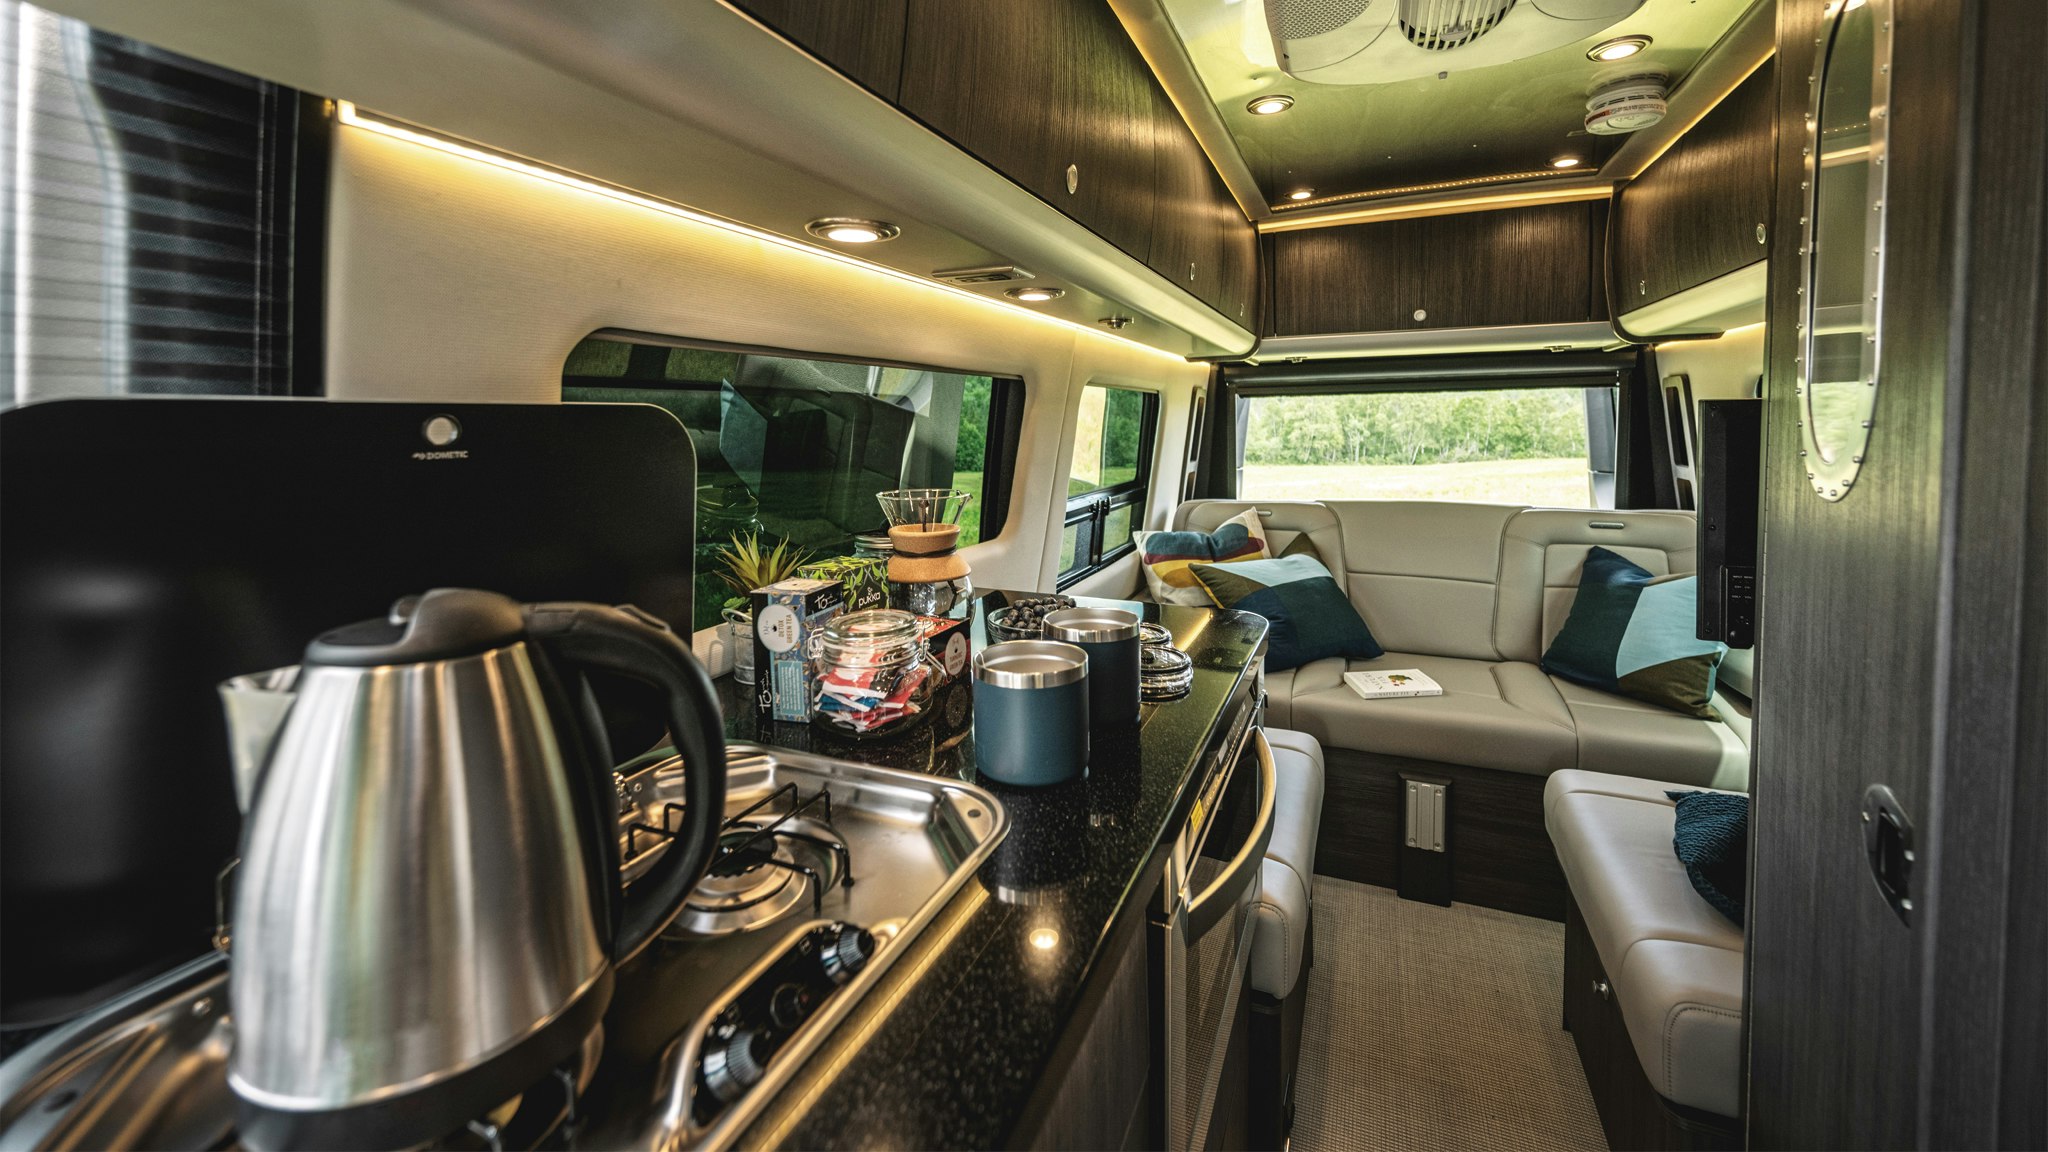 5 Small Kitchen Appliances for an RV - Thor Motor Coach